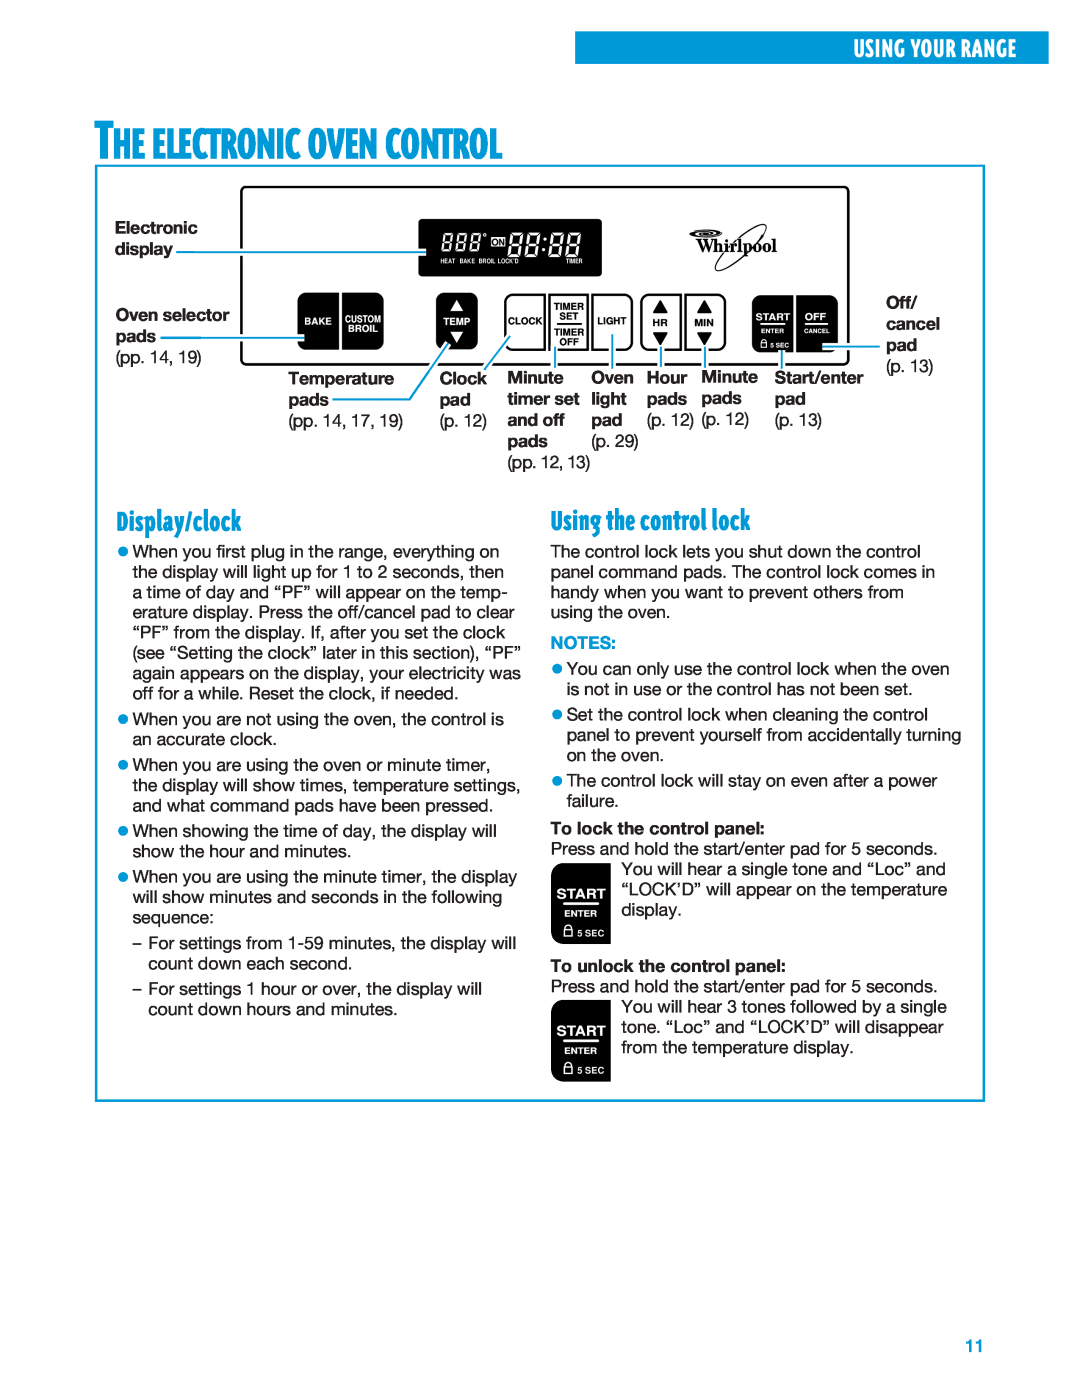 Whirlpool SF325PEE warranty The Electronic Oven Control, Display/clock, Using the control lock, Using Your Range 